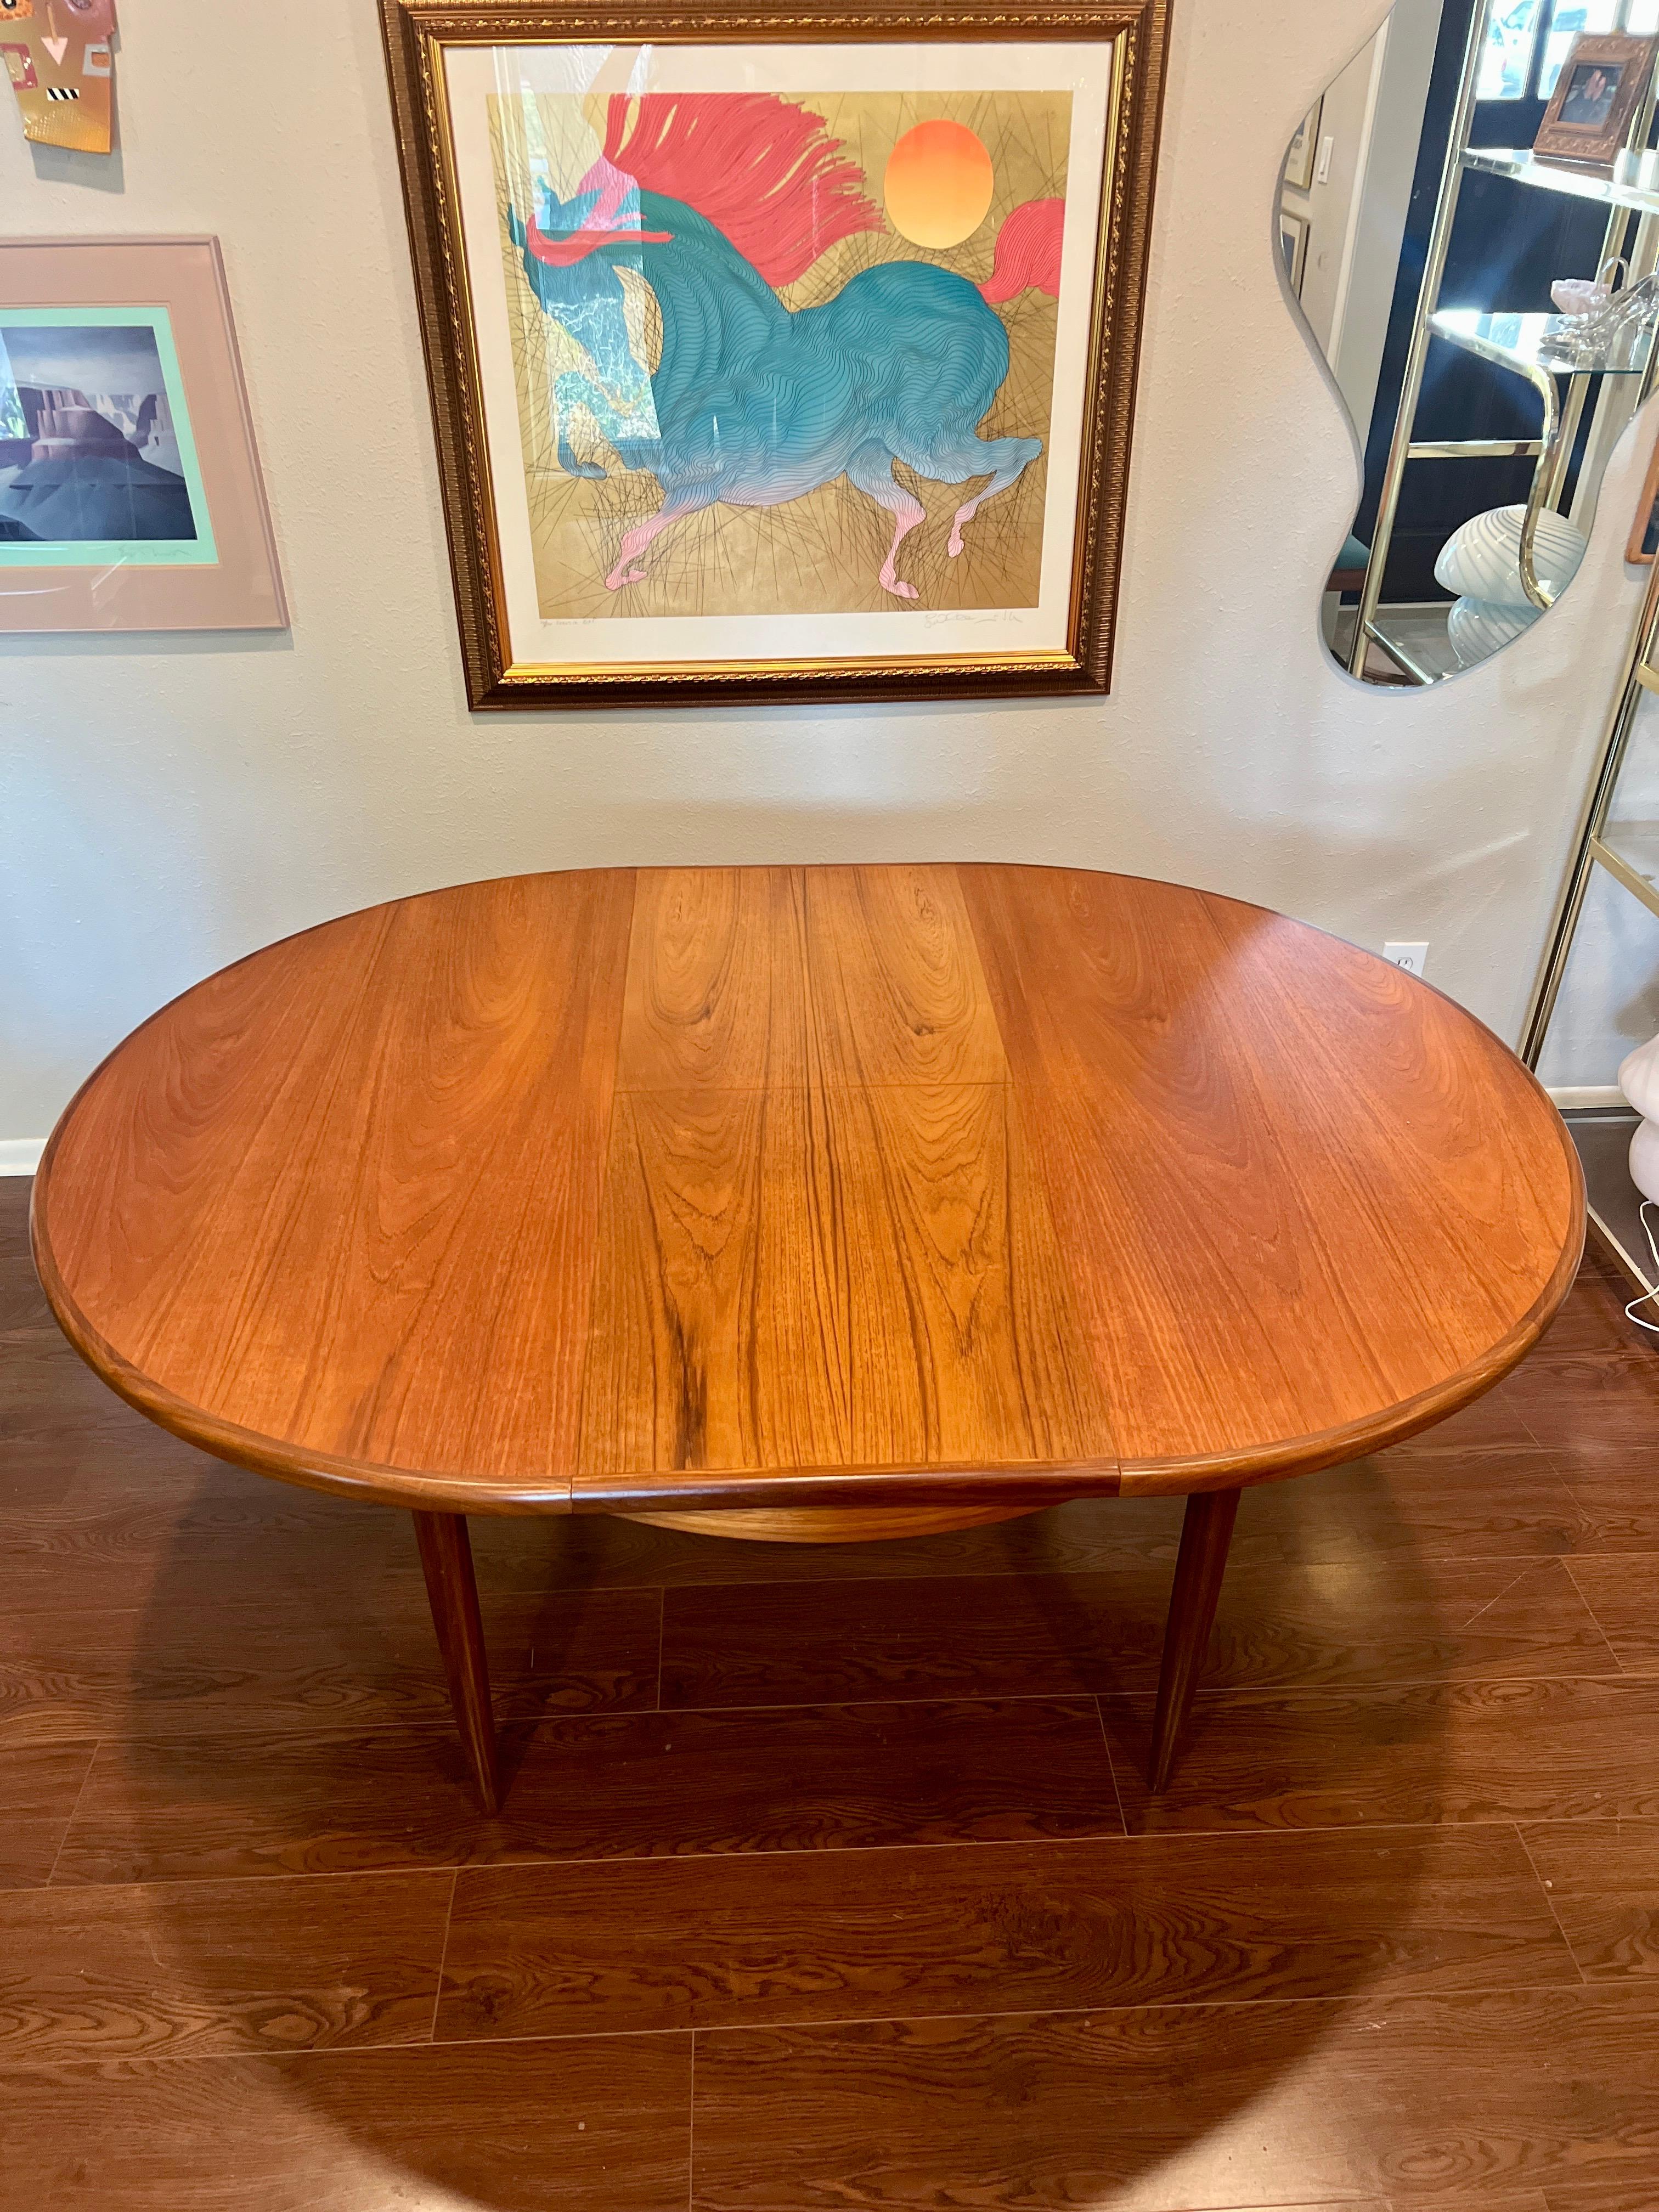 Mid-Century Modern A MCM round teak dining table by G plan, with one 18